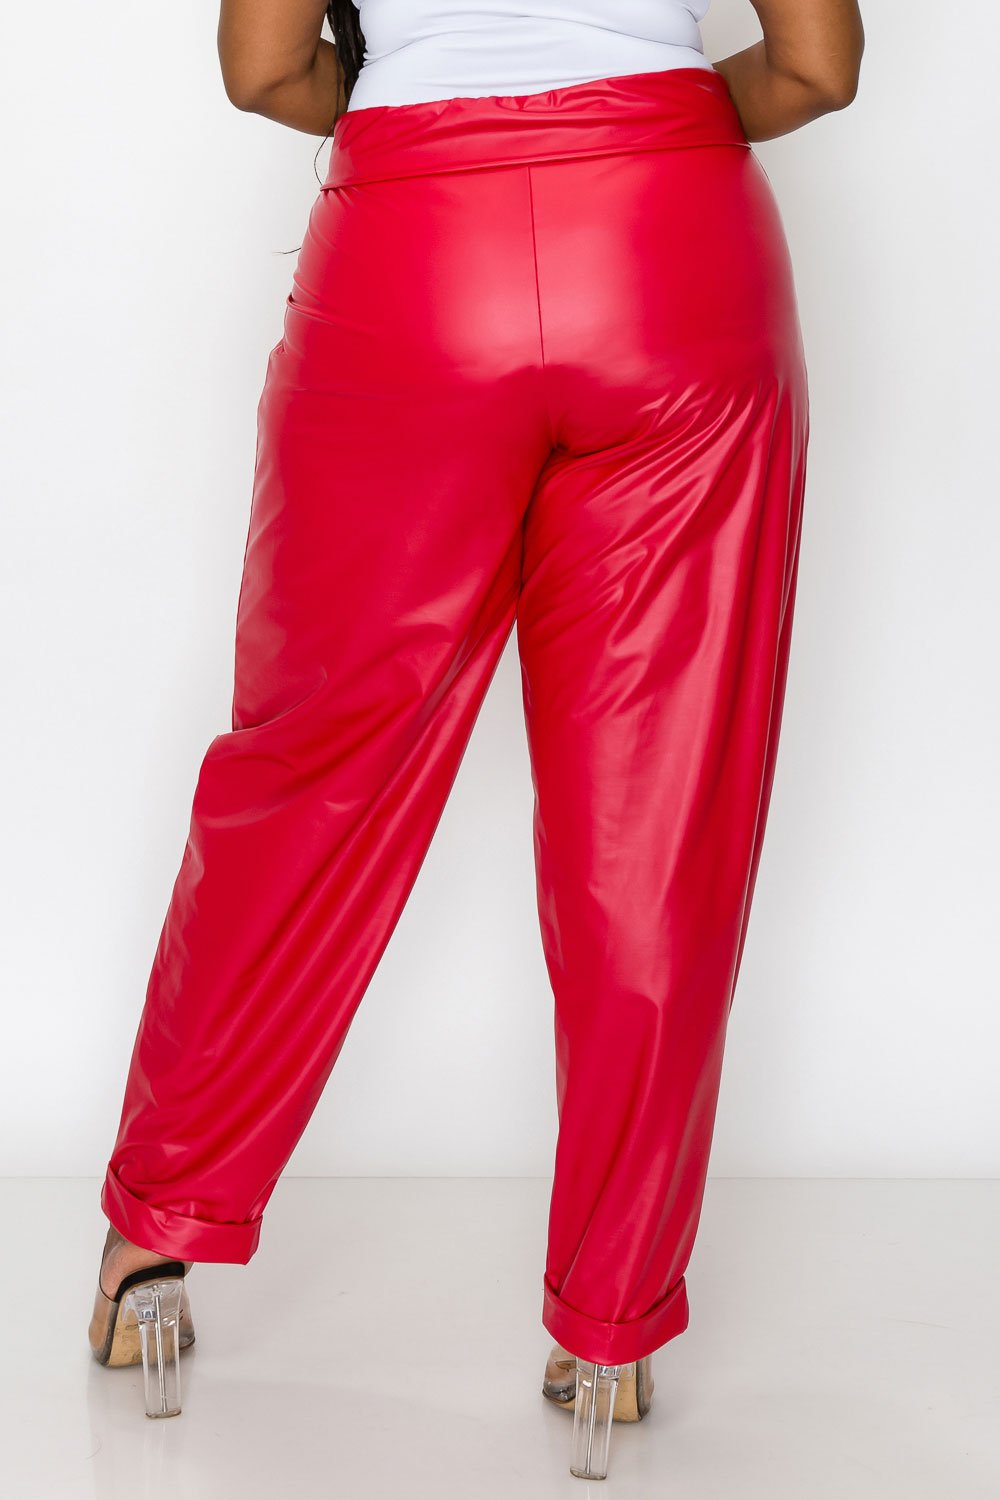 livd L I V D women's trendy plus size fashion made in USA contemporary collared faux leather pants pu with large outside pockets and folded ankle cuff in red